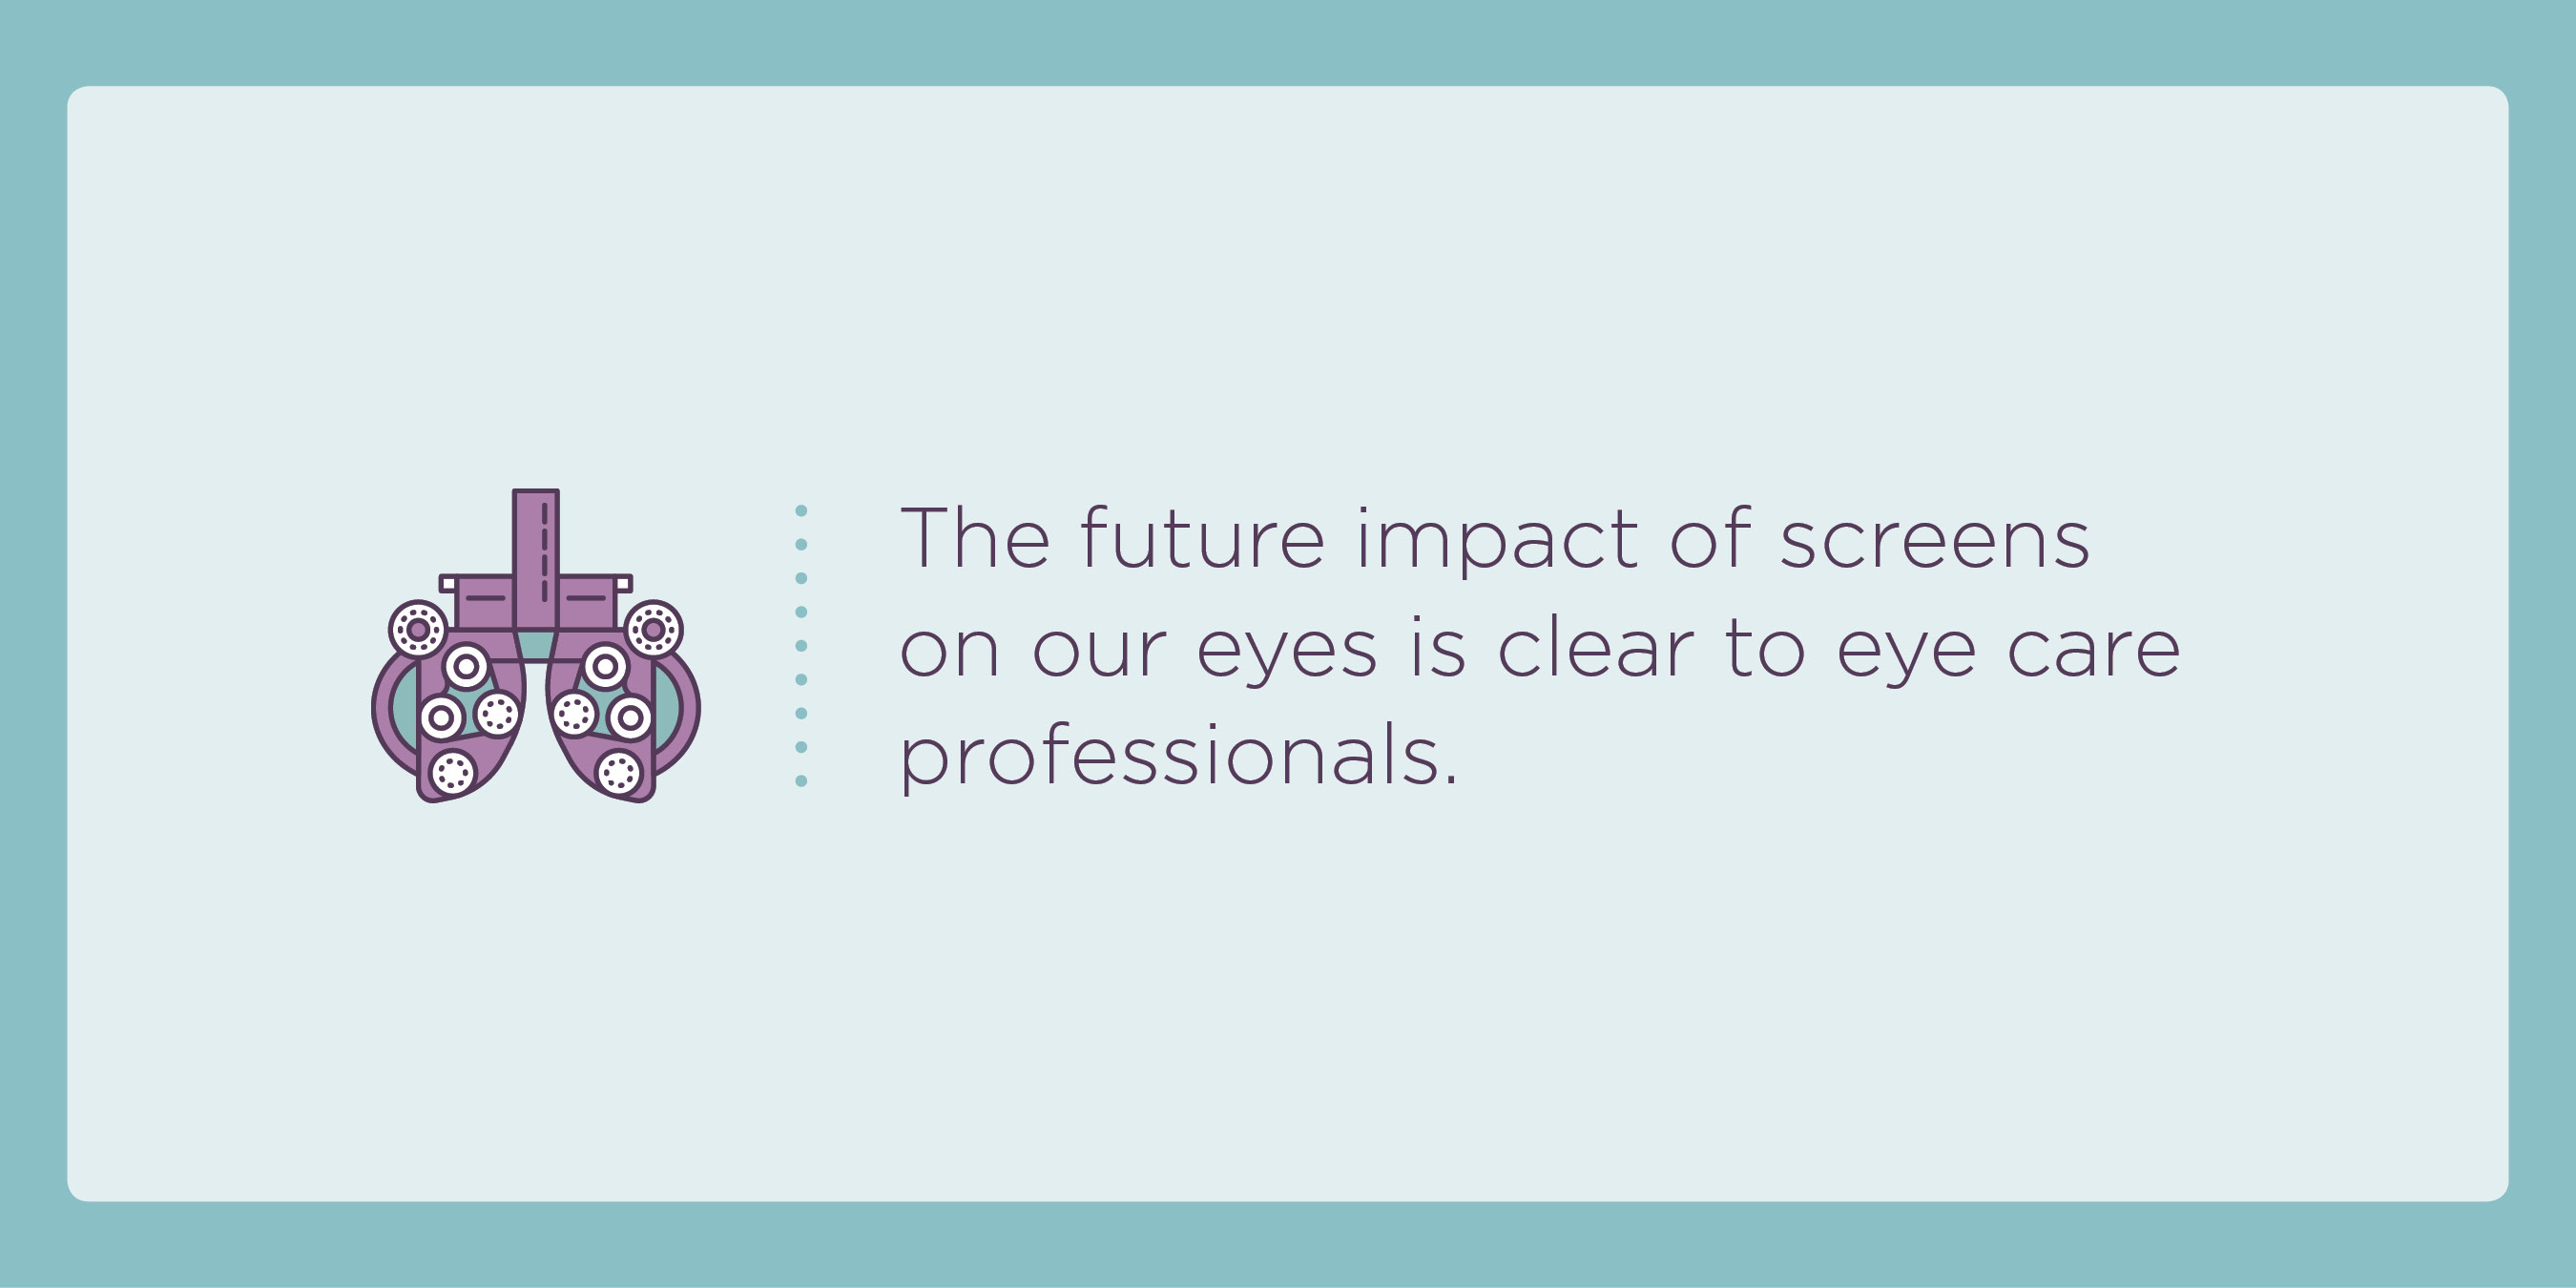 Experts agree that screens impact our eye health